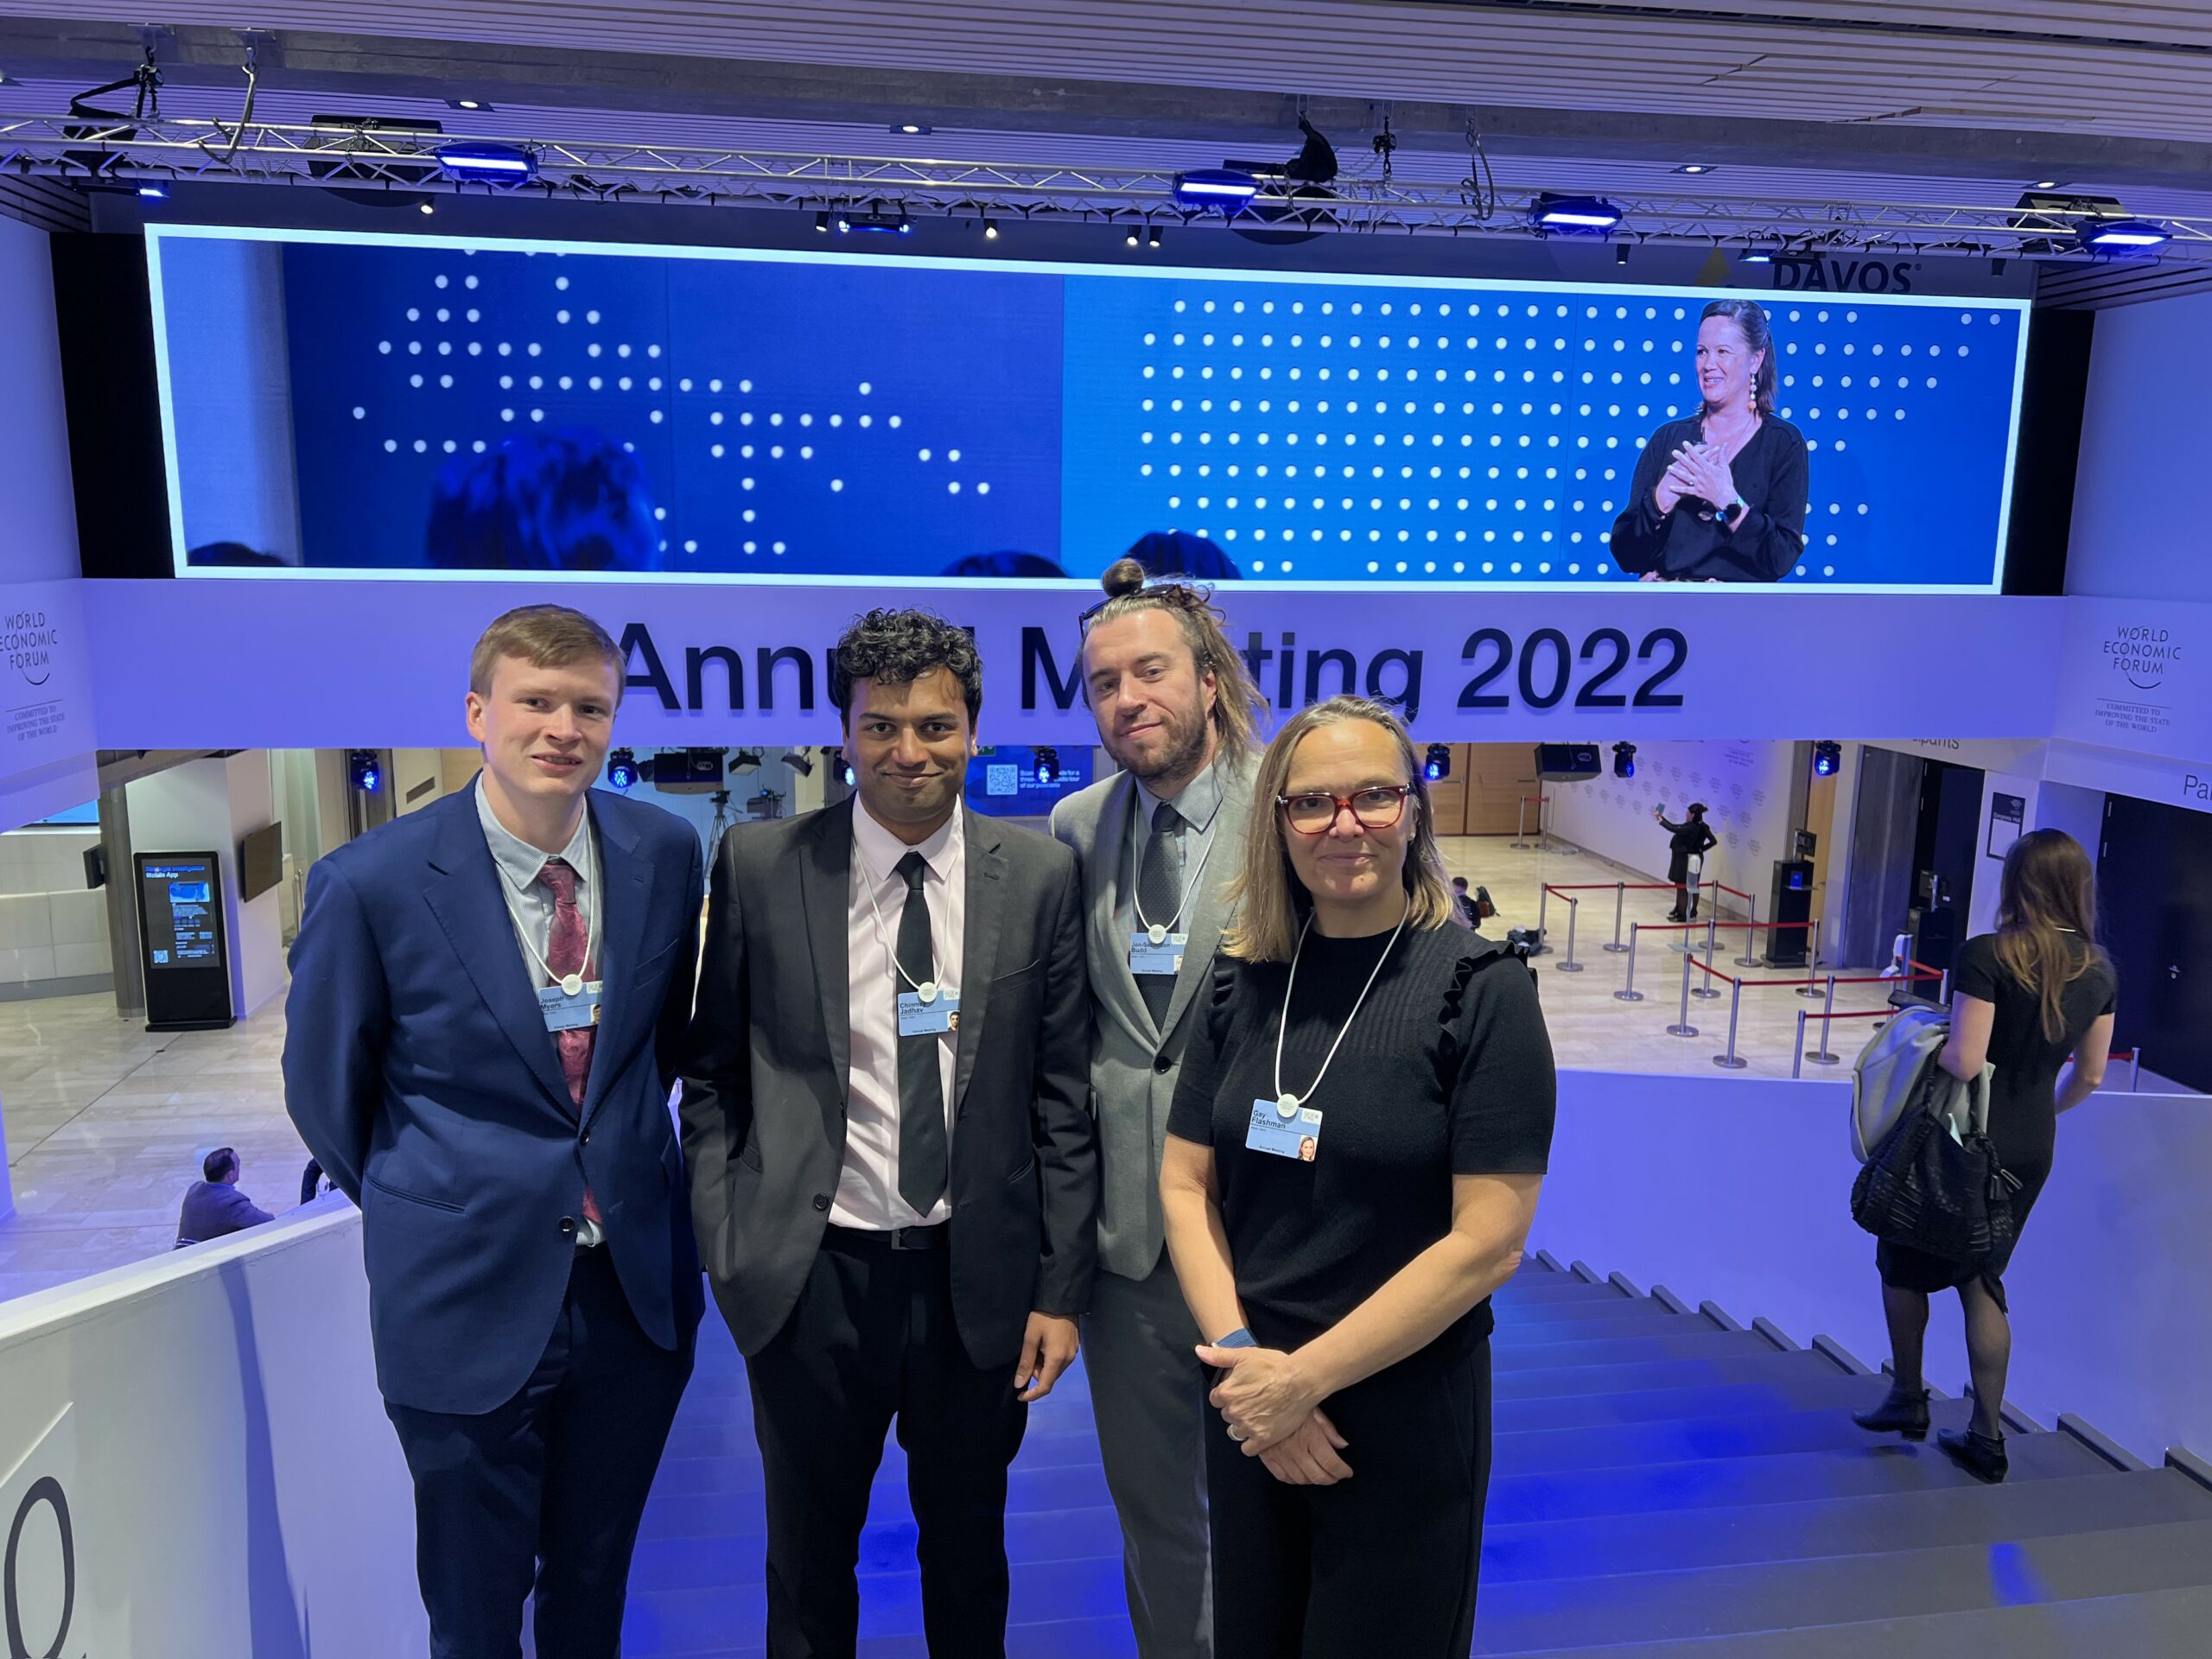 Four Formative Content team members at the World Economic Forum's Annual Meeting in Davos